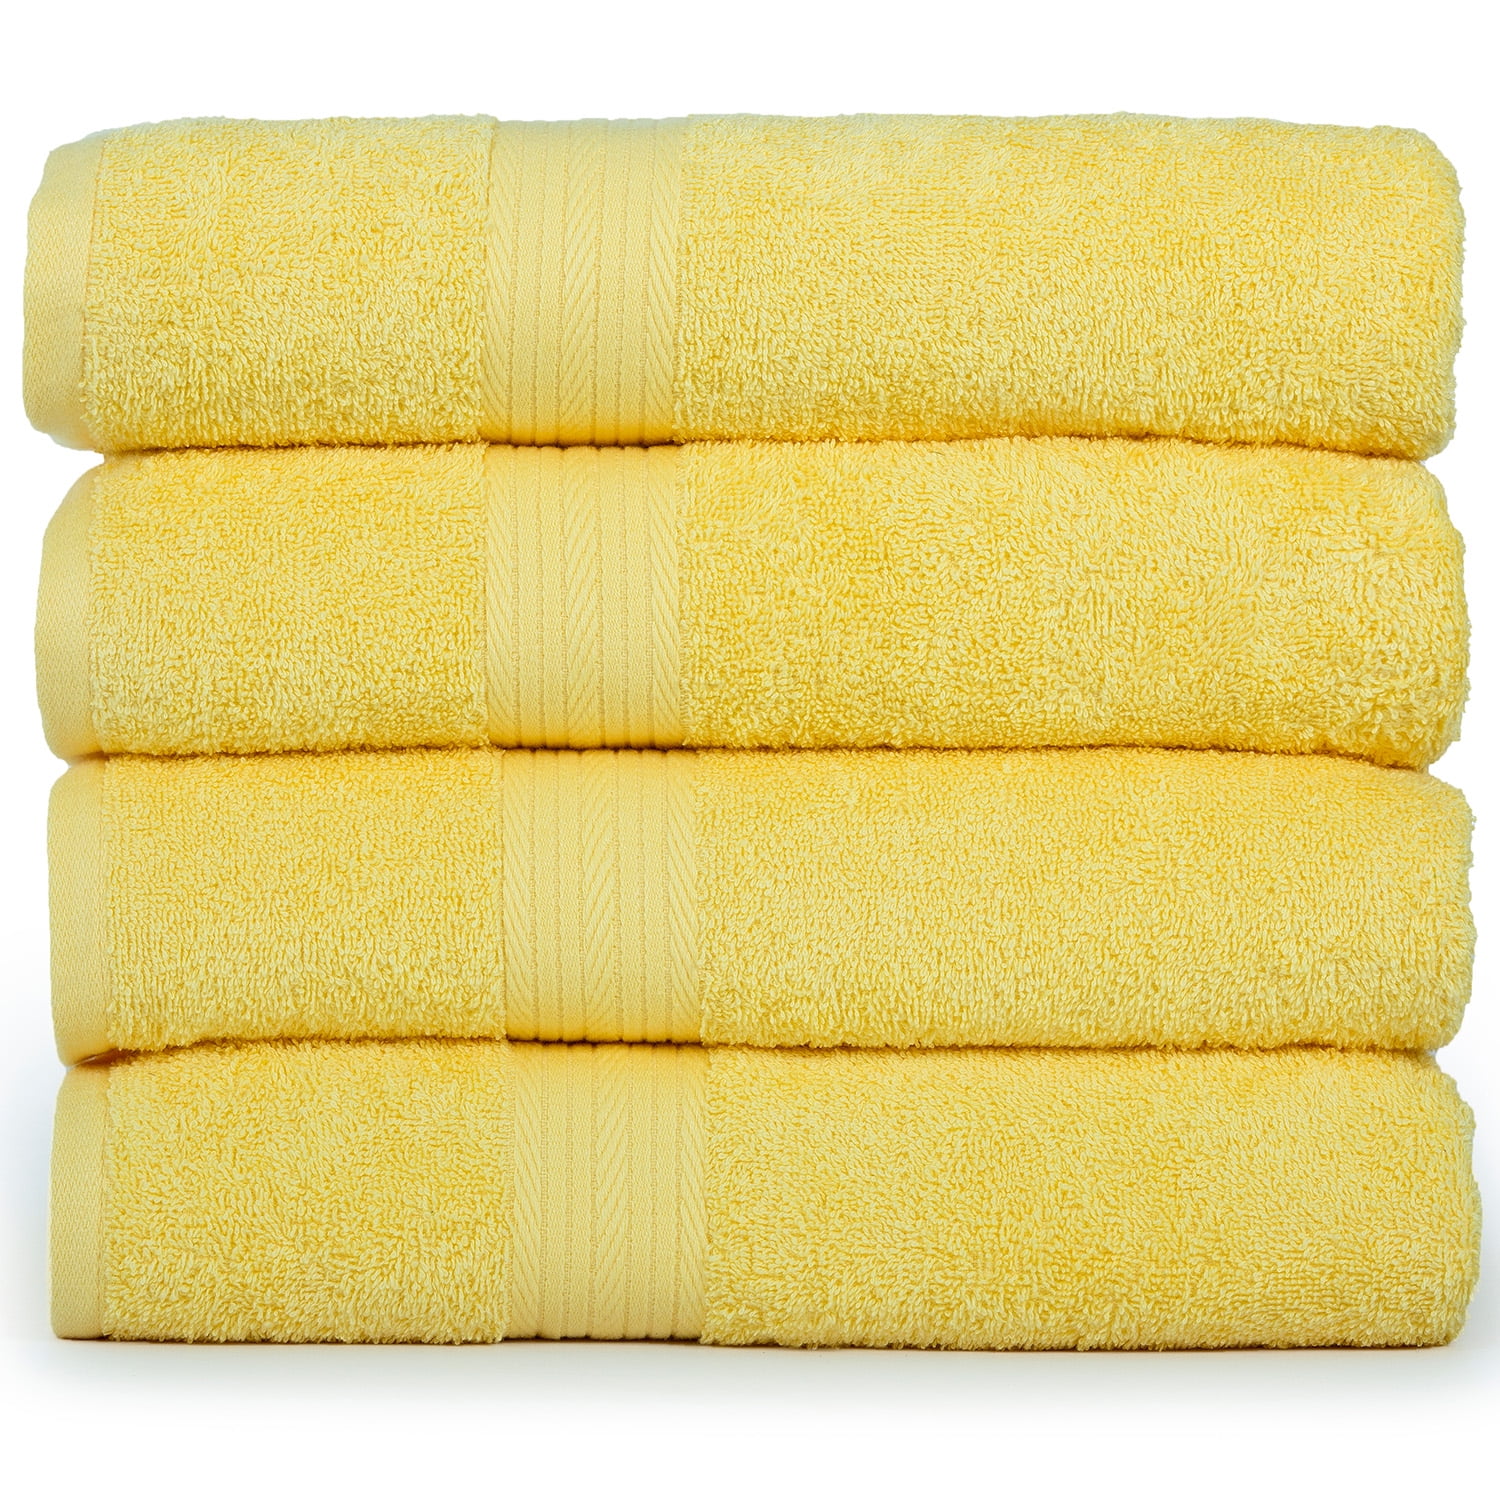 Ample Decor Bath Towel 30 x 54 inch Pack of 8 600 GSM 100% Cotton, Soft  Absorbent, Lightweight, Quick Drying, Machine Washable for Hotel, Gym,  Kitchen